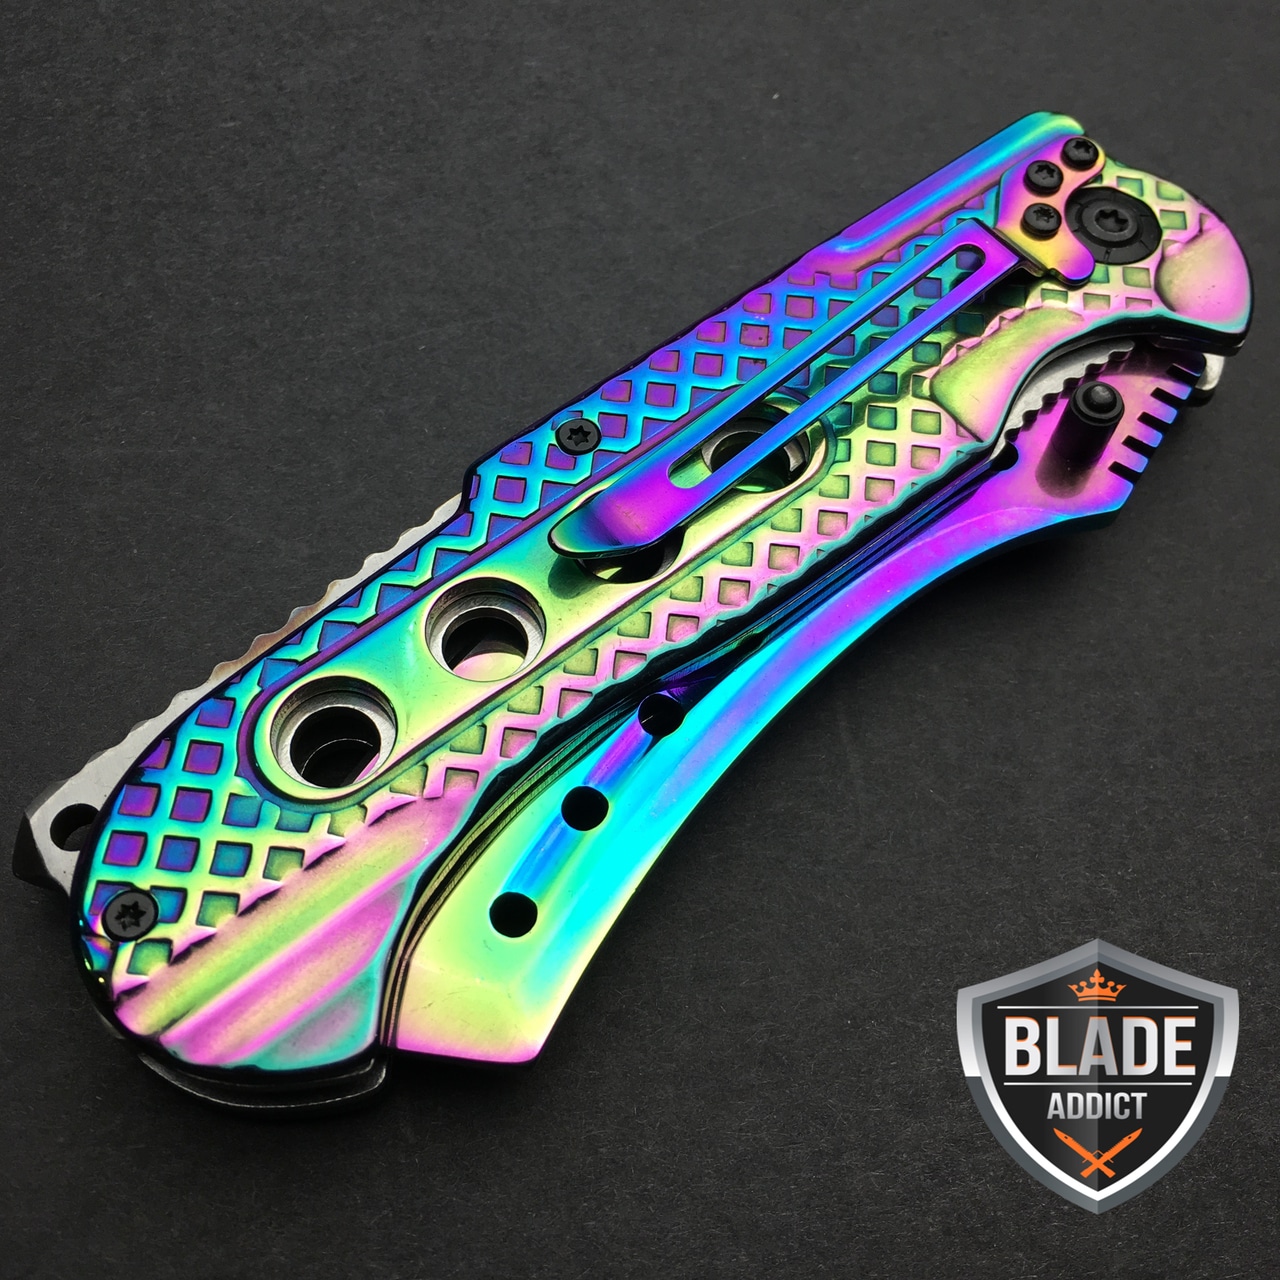 9" TACTICAL Razor Spring Assisted Open Folding Pocket Knife RAINBOW CLEAVER New